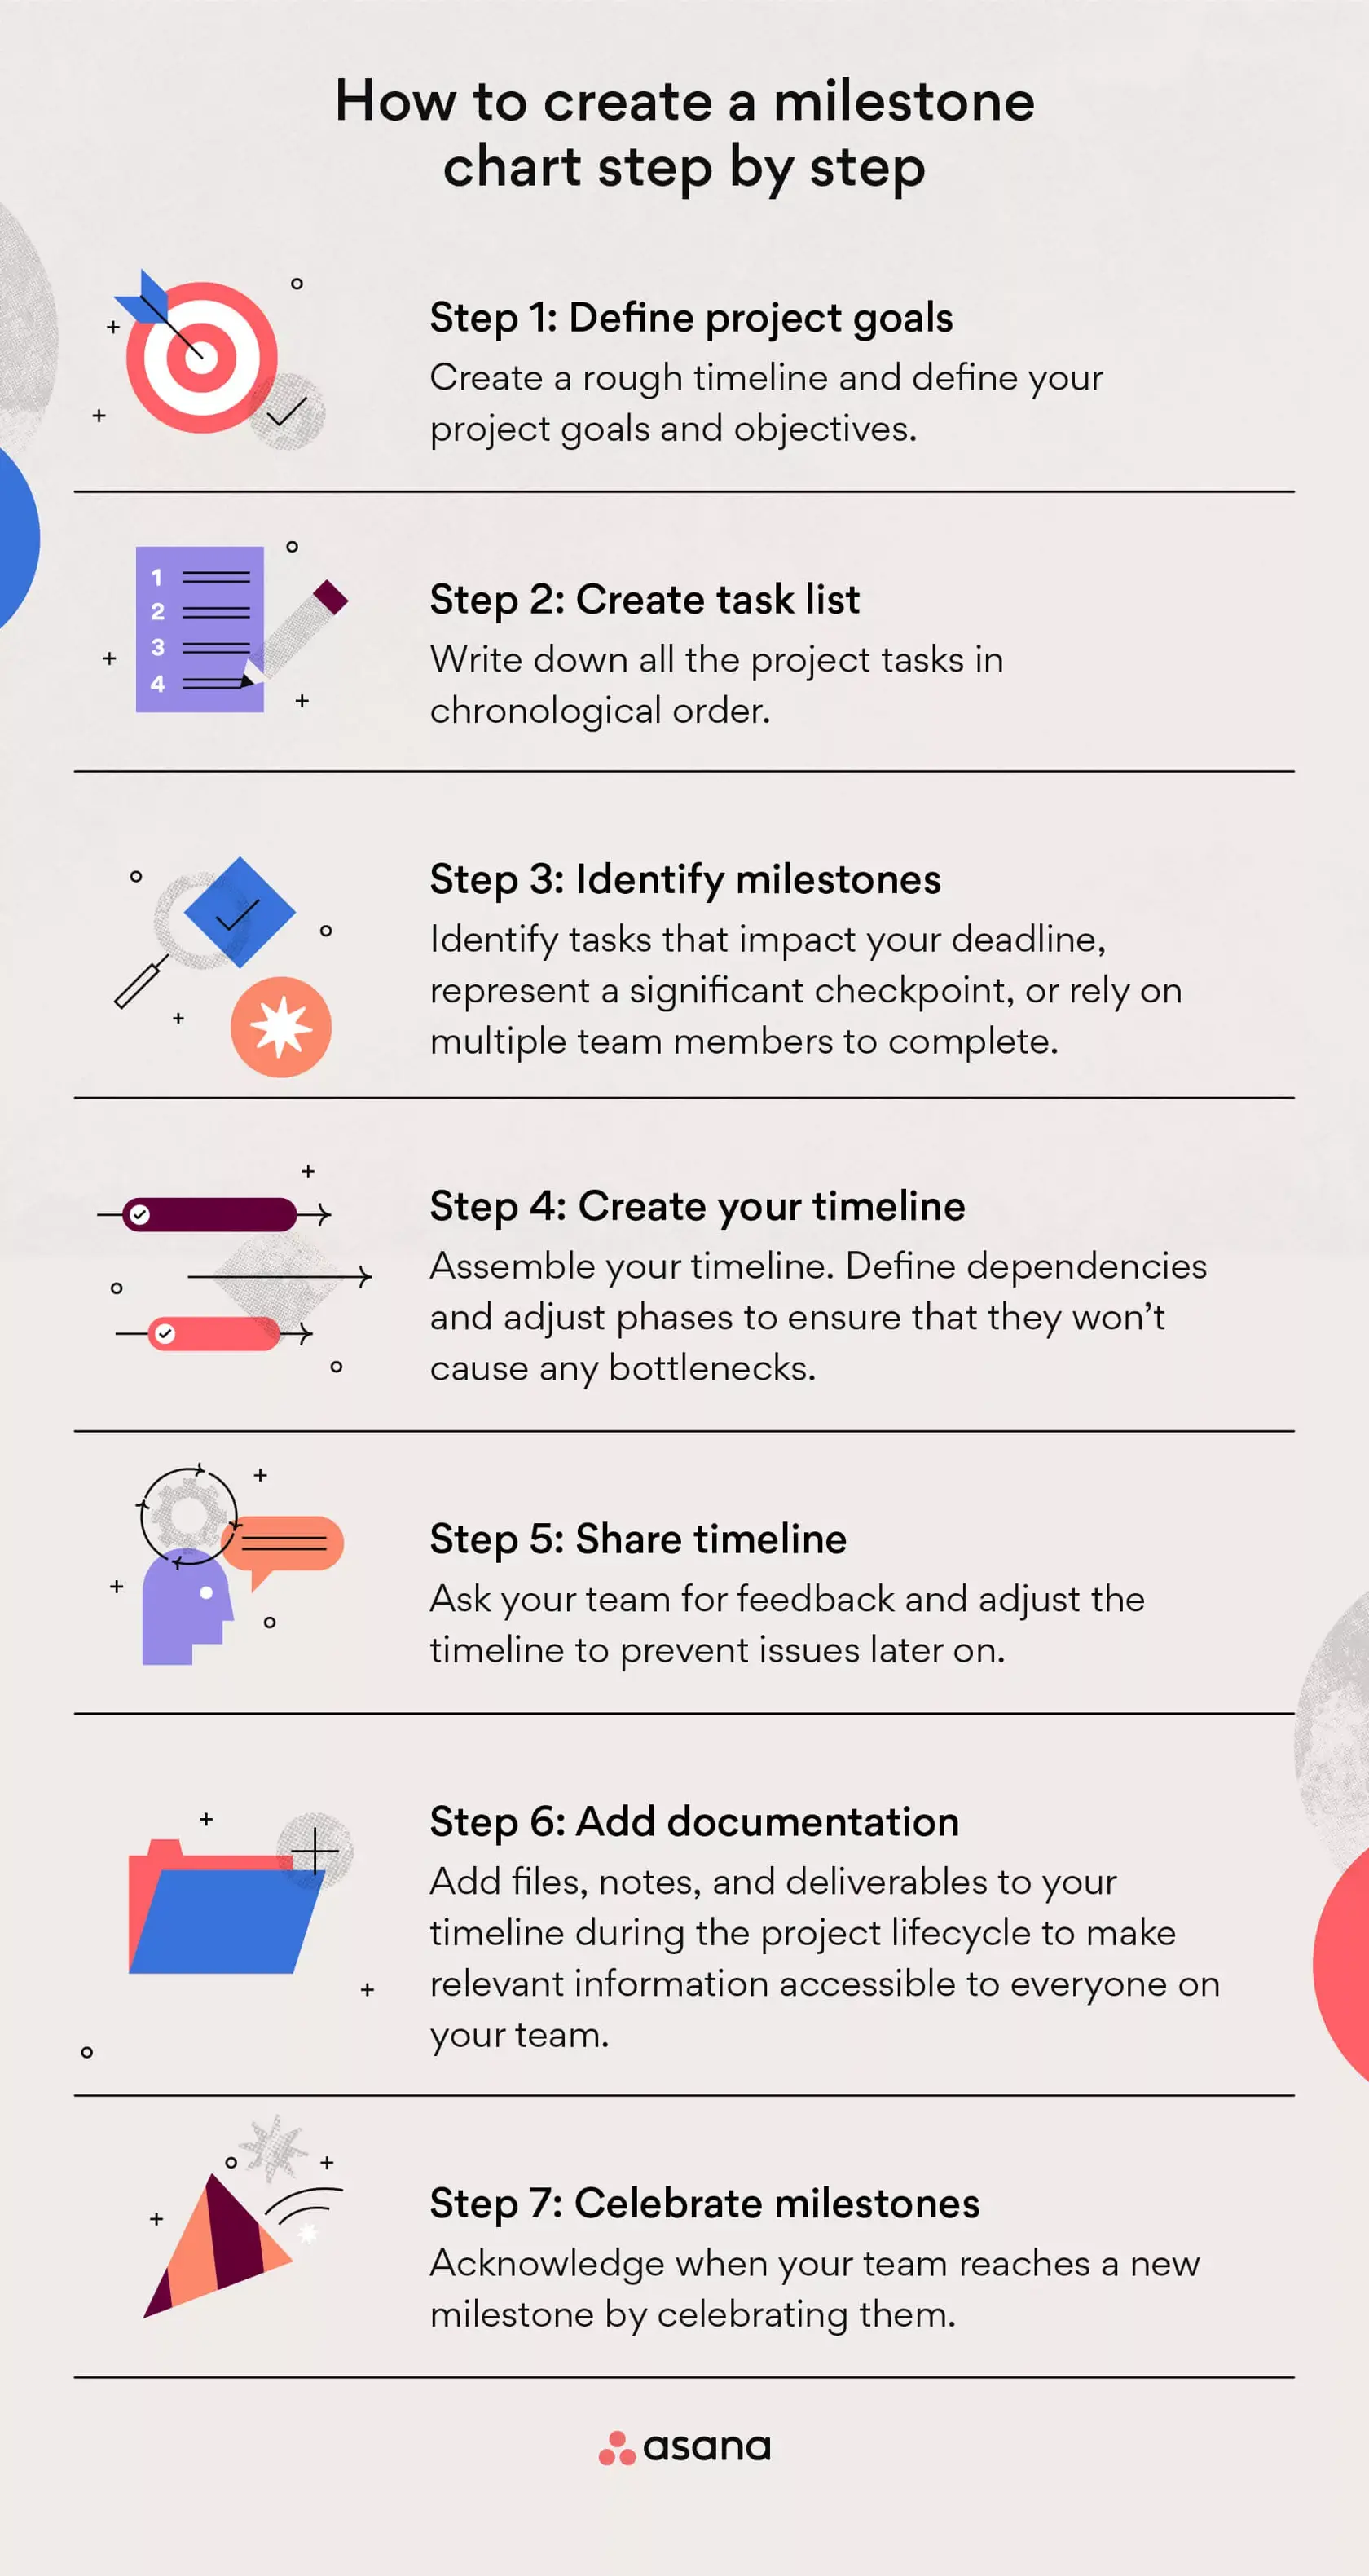 [inline illustration] how to create a milestone chart step by step (infographic)